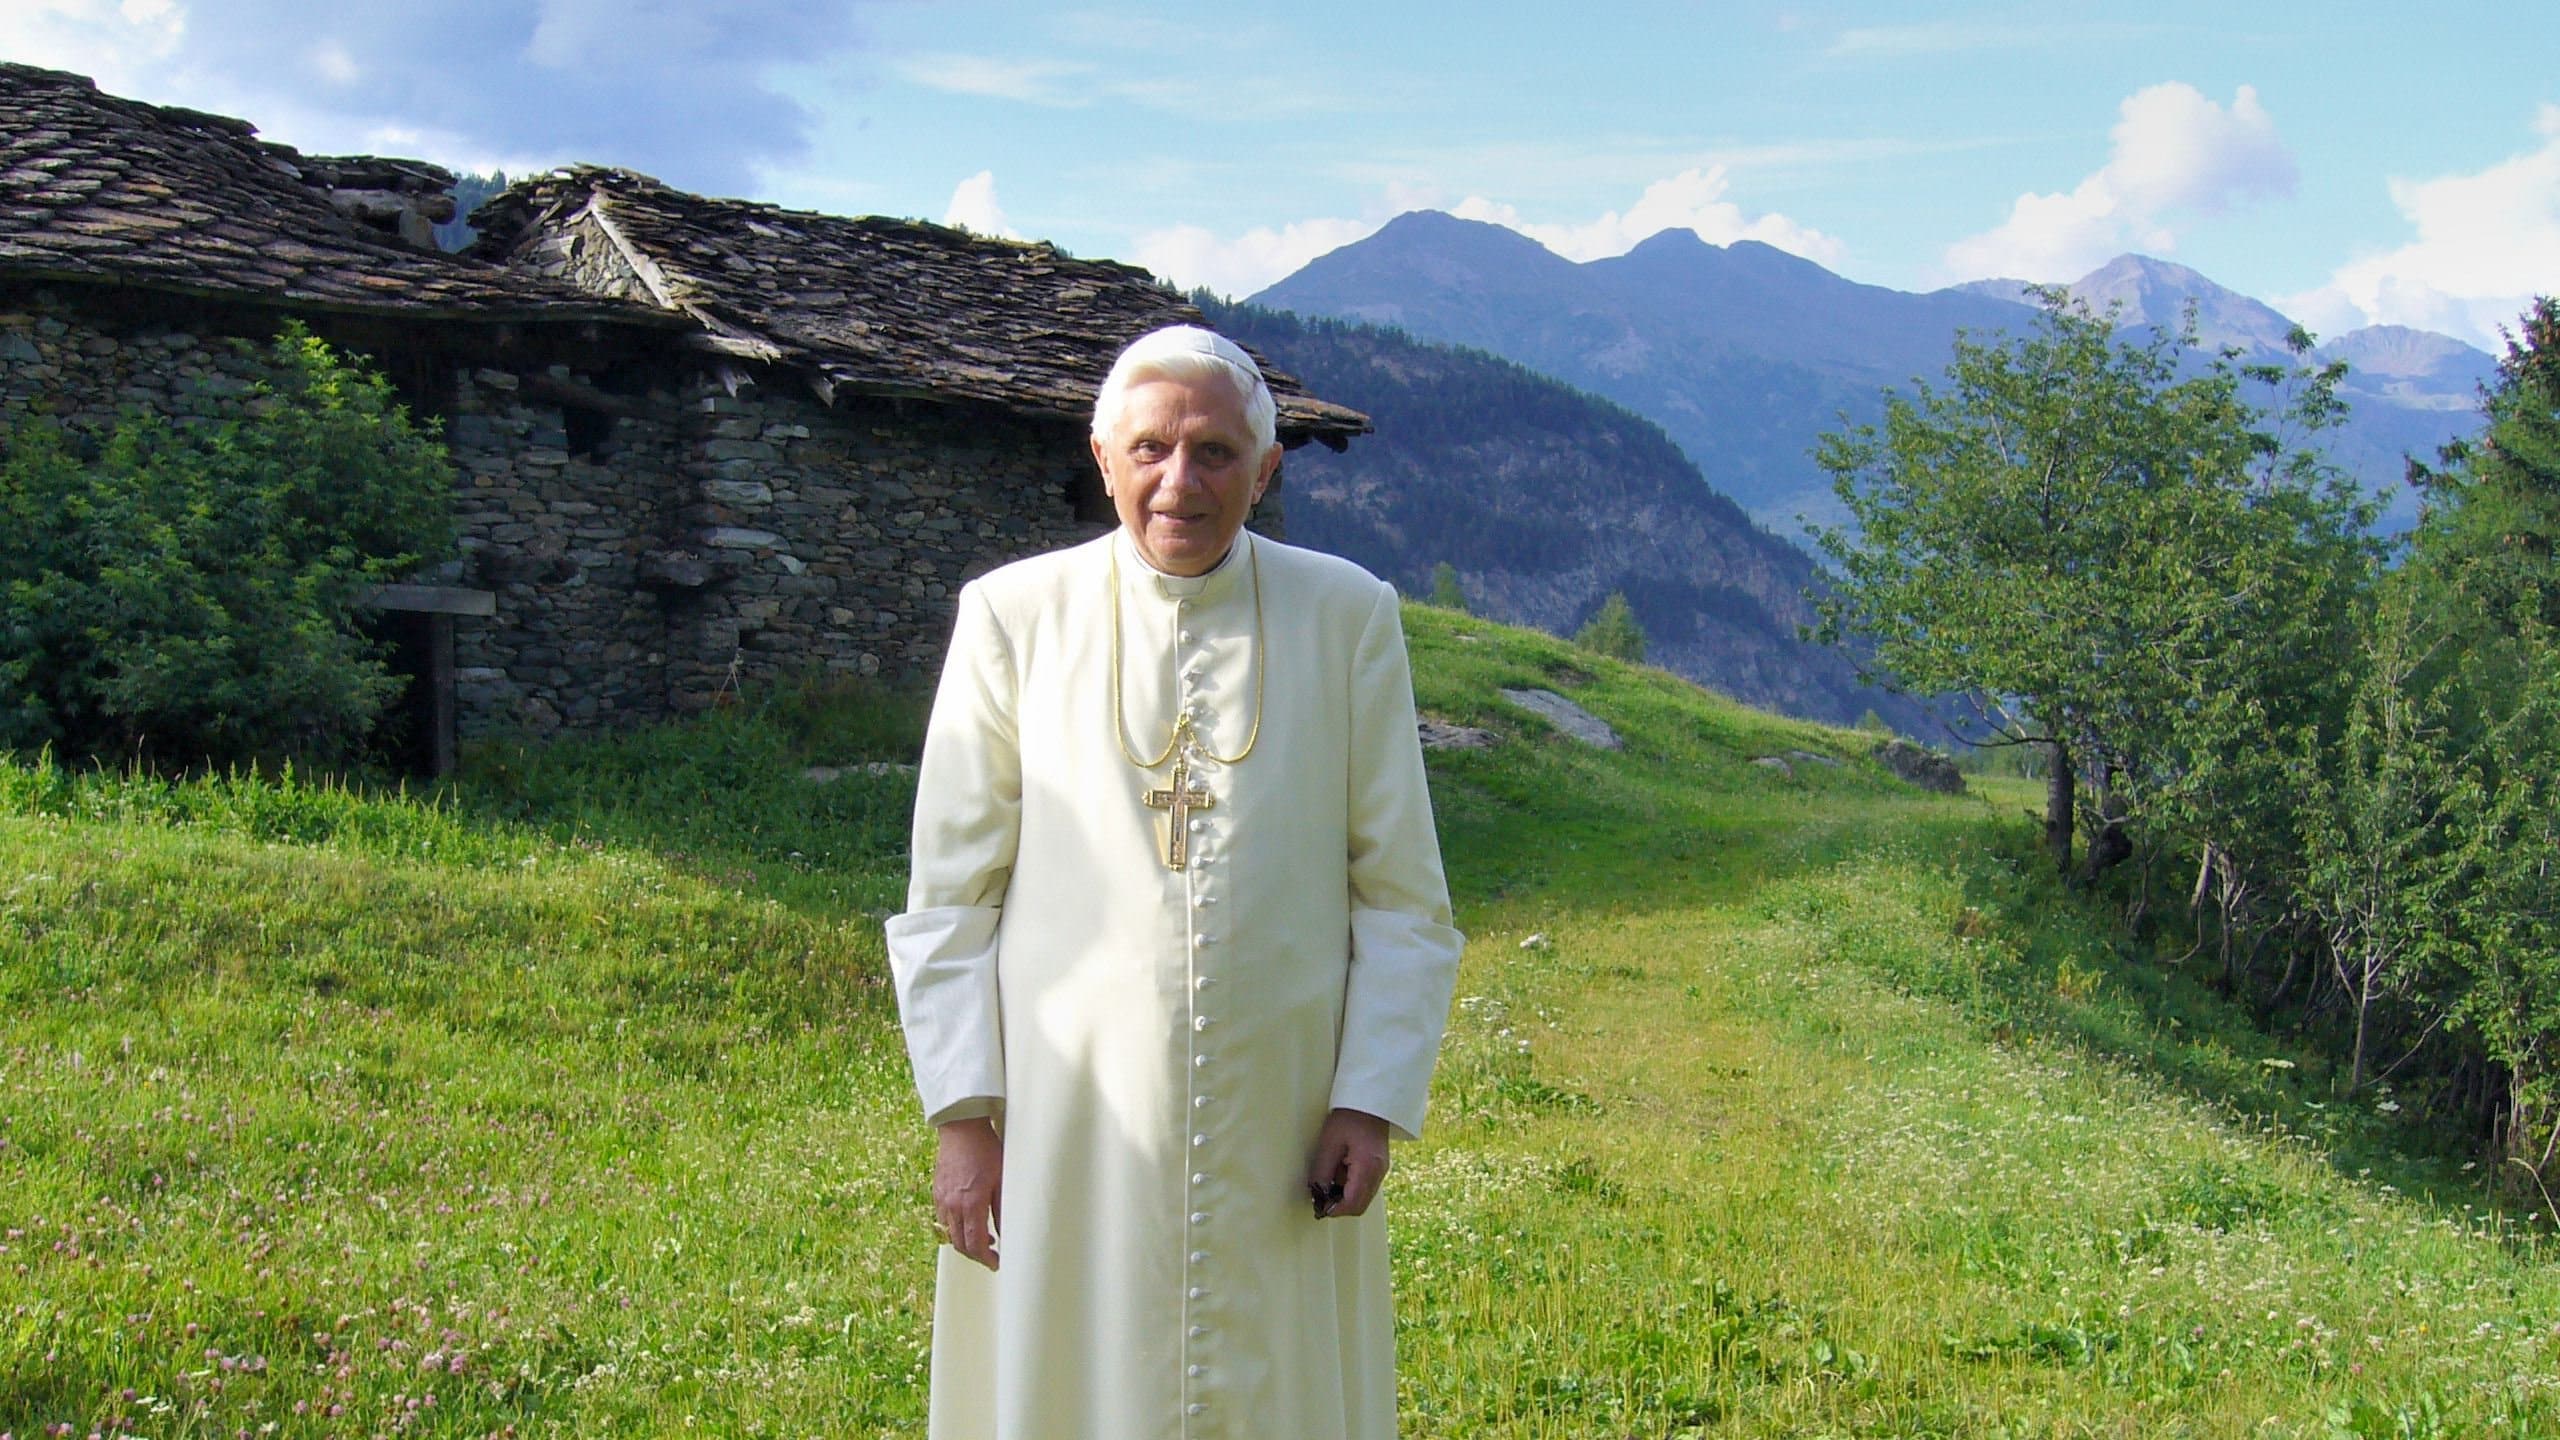 Retired Pope Benedict XVI's final message to Catholics around the world was: "Stand firm in the faith! Do not let yourselves be confused!"